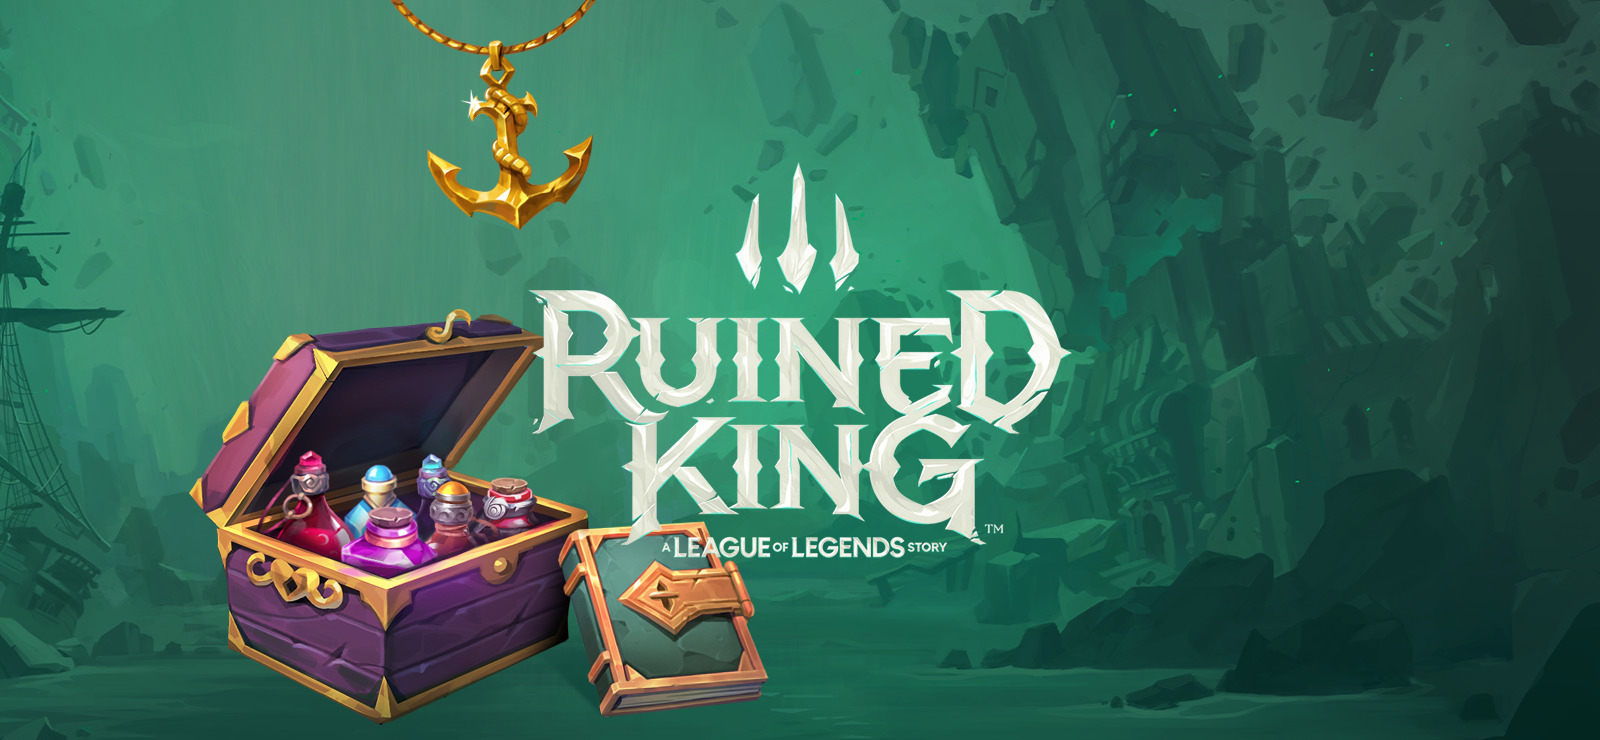 Ruined King: A League of Legends Story™ - Deluxe Edition Bundle